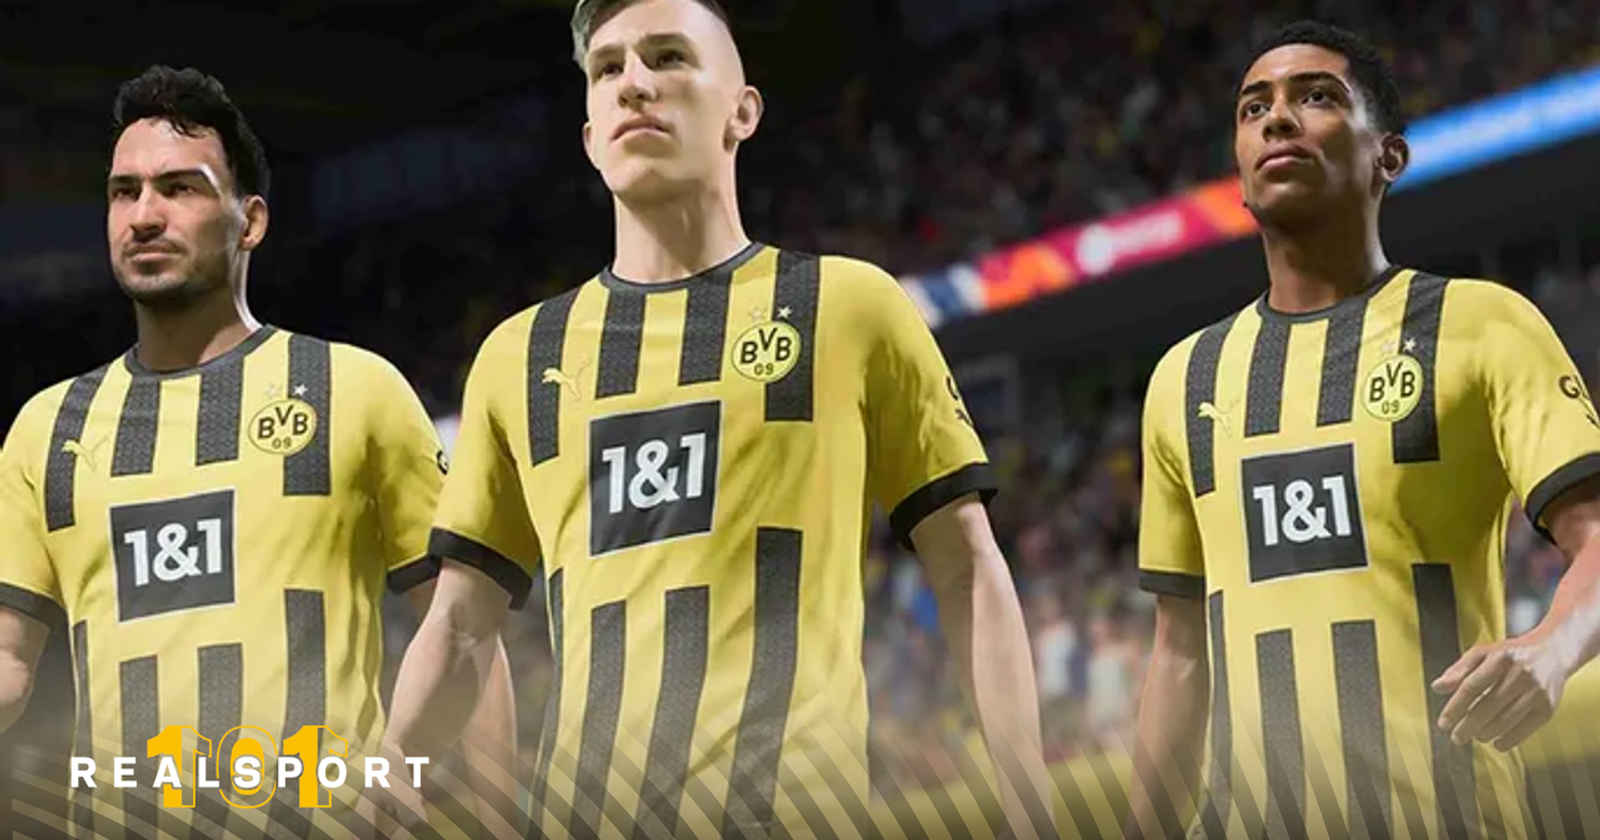 Raphael Guerreiro is Bundesliga Player Of The Month (POTM) for March in  FIFA 23 •